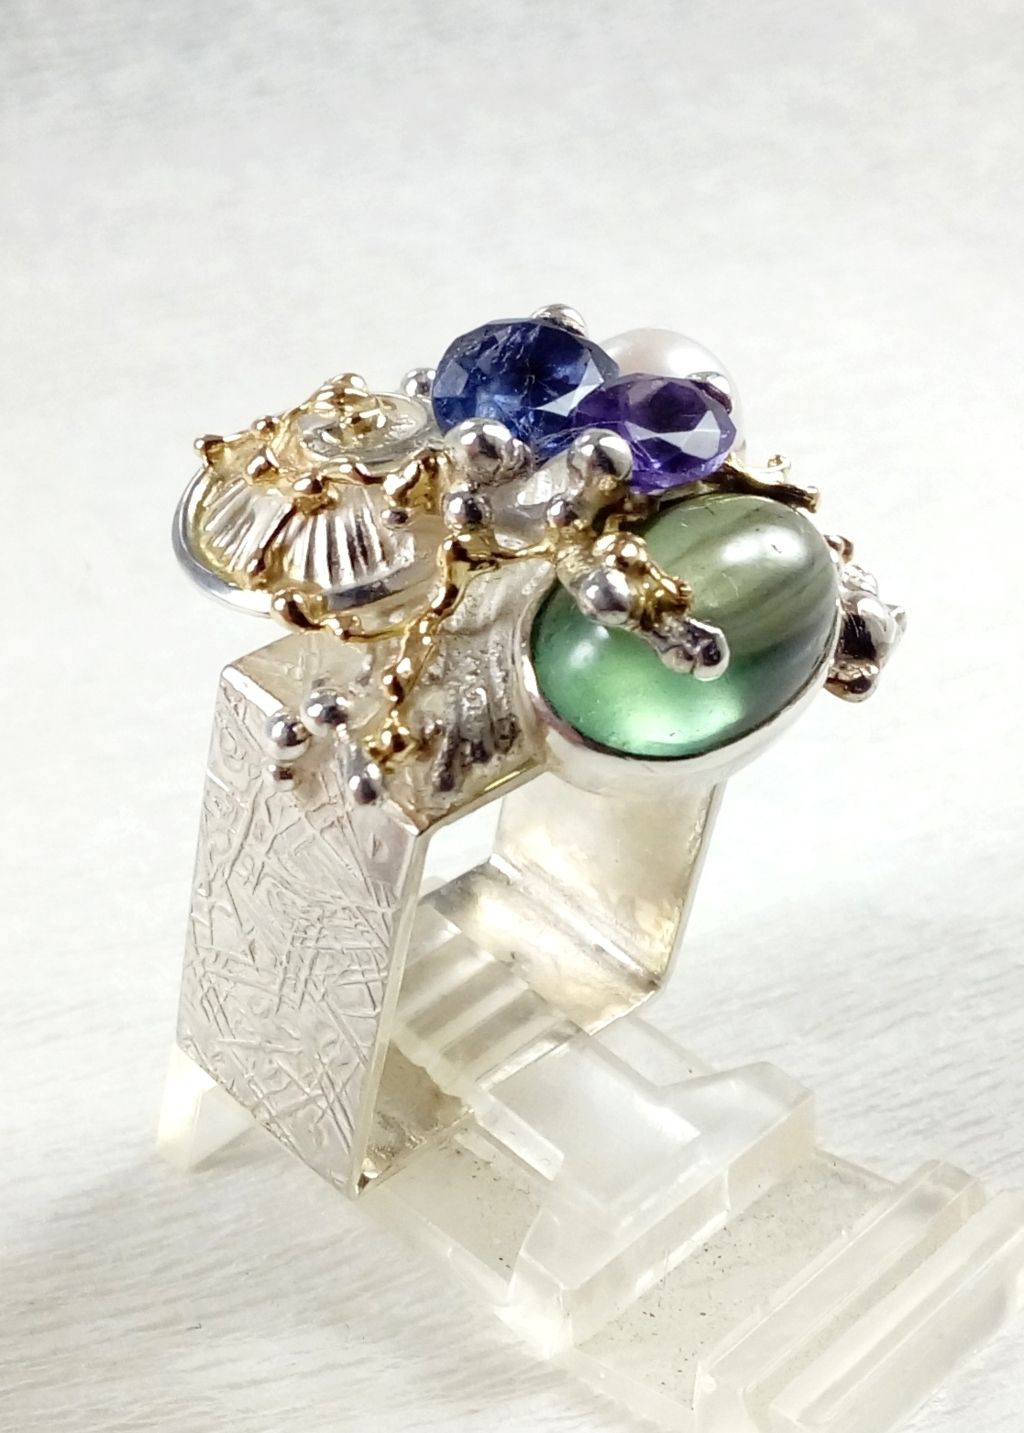 jewelry made from gold and silver, jewelry with color stones, jewelry with real pearls, gregory pyra piro square ring 4821, fine craft gallery handcrafted ring for sale, sterling silver and 14 karat gold ring, rings for women with amethyst, fluorite, iolite and pearl, one of a kind handcrafted ring, where to find auctions with fine art and designer jewellery, where to buy gregory pyra piro jewelry right now